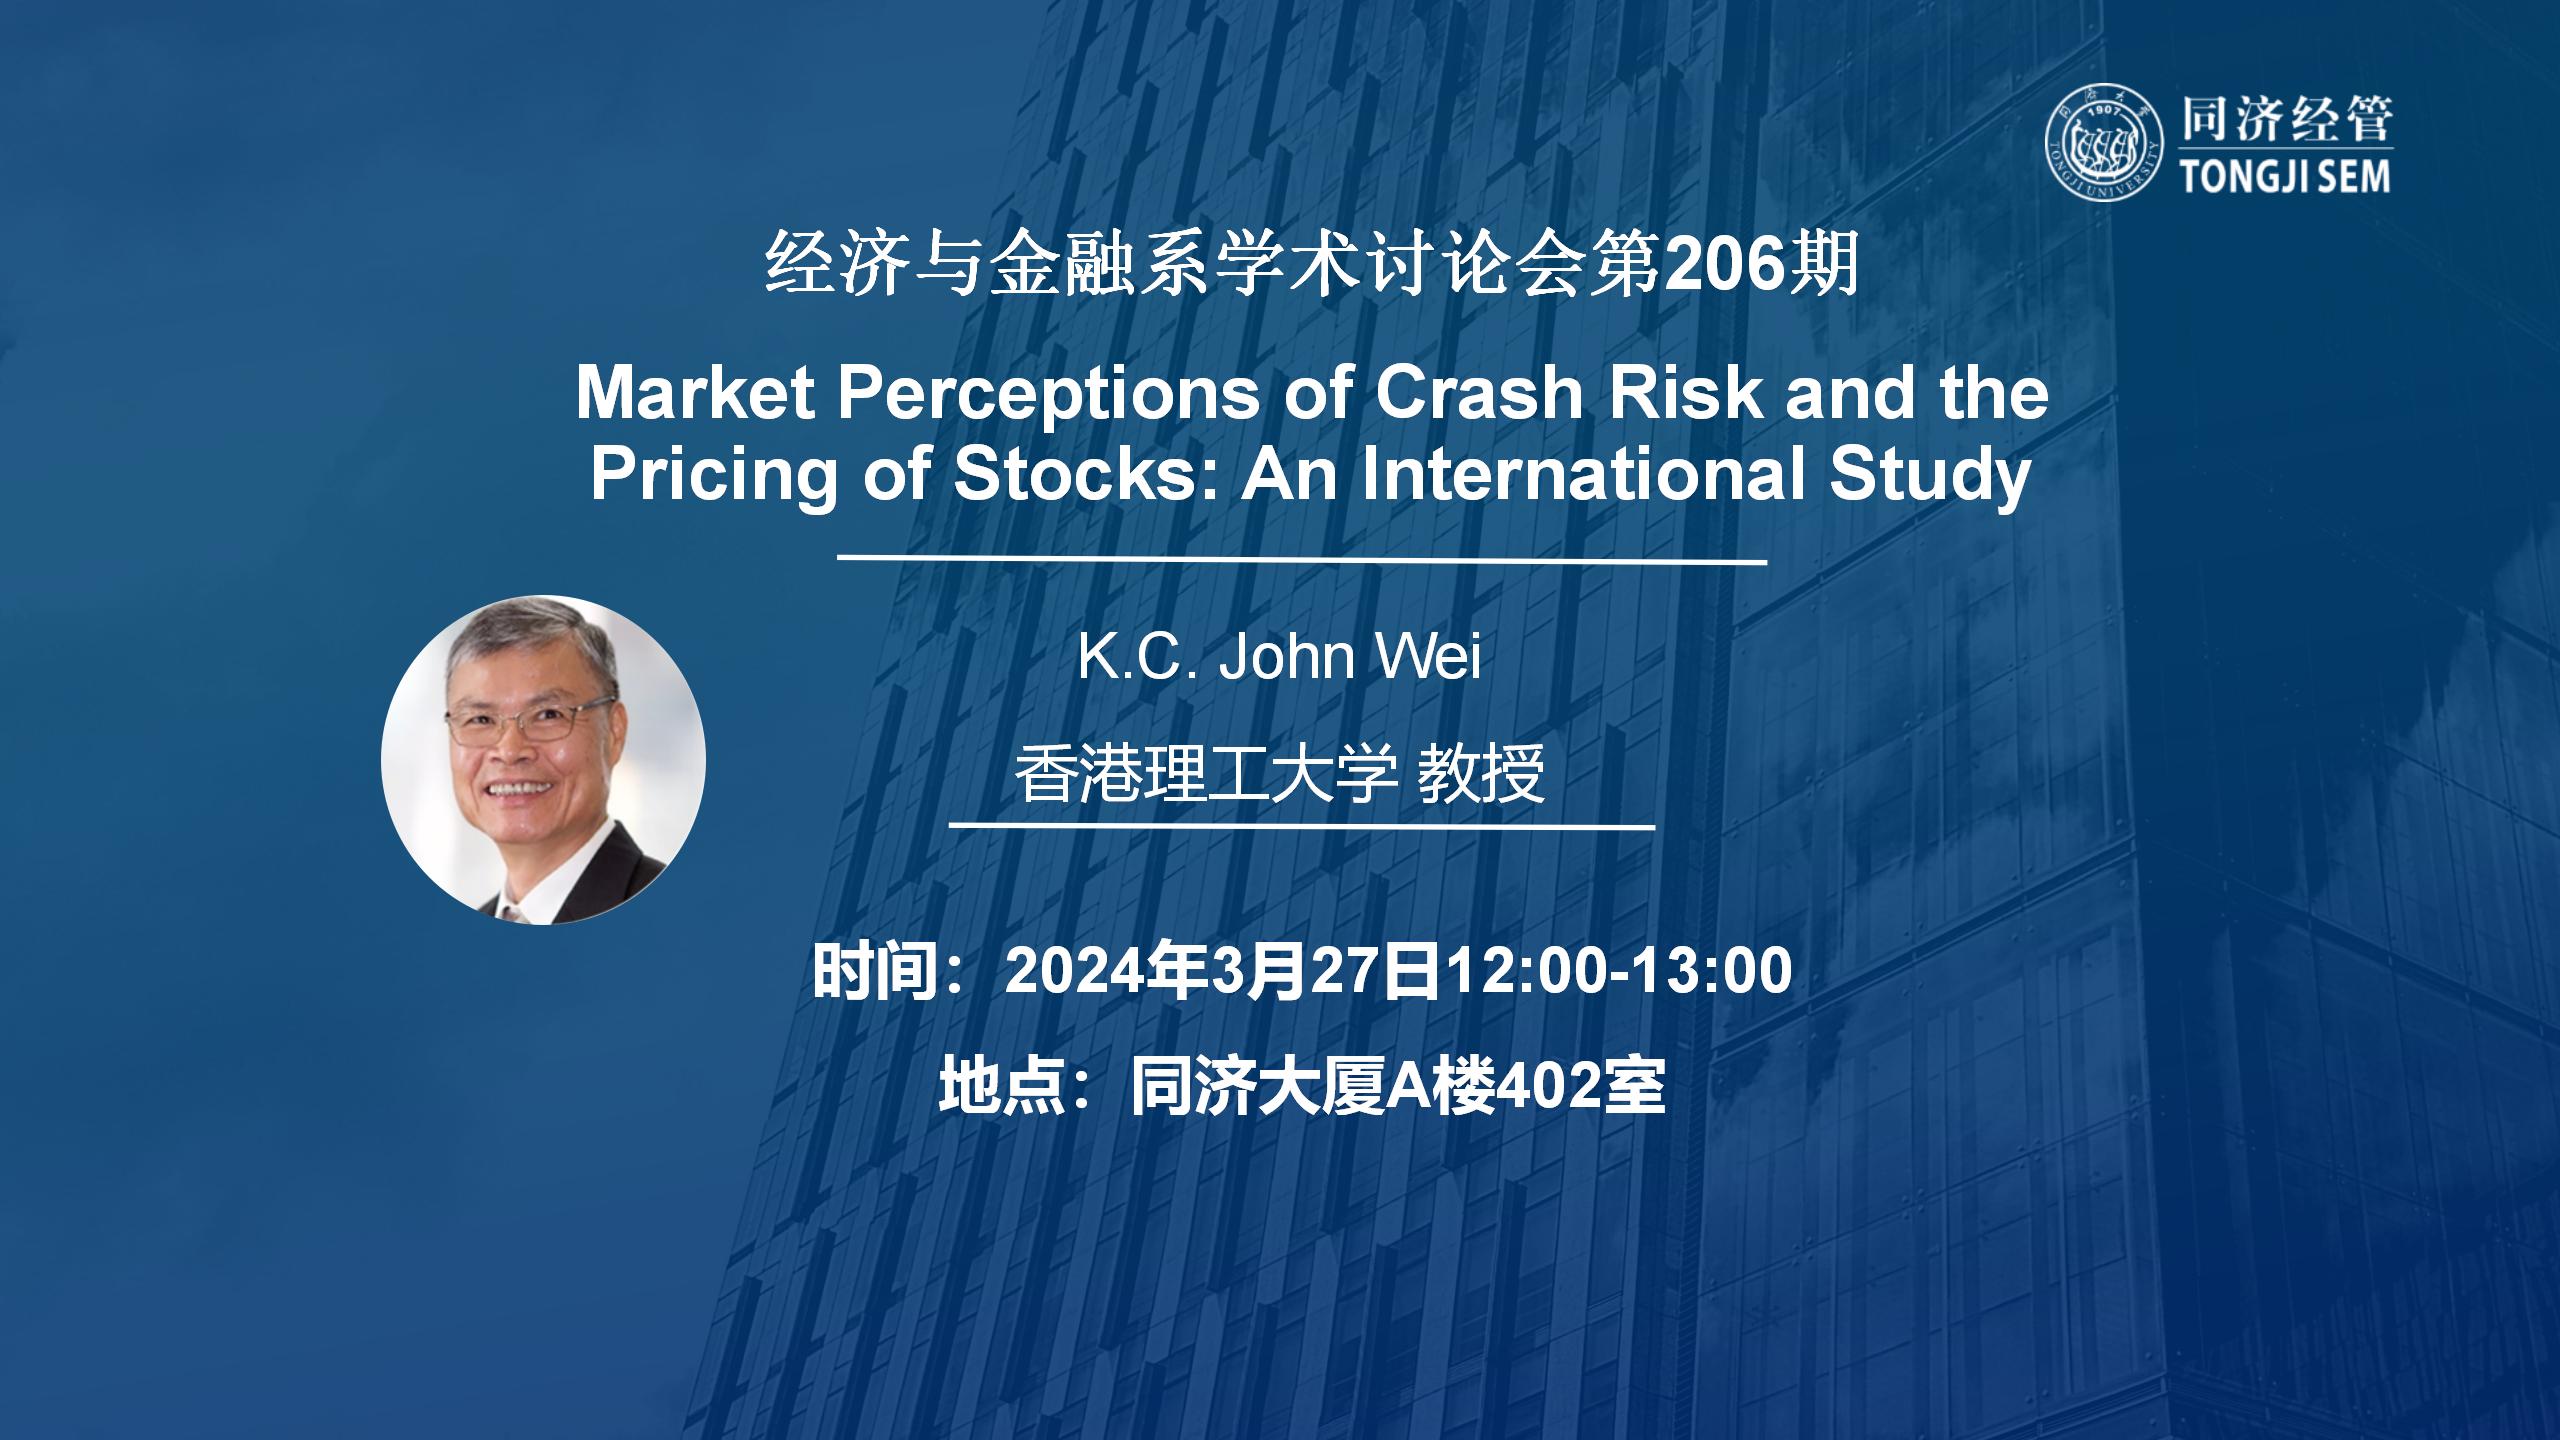 Market Perceptions of Crash Risk and the Pricing of Stocks: An International Study